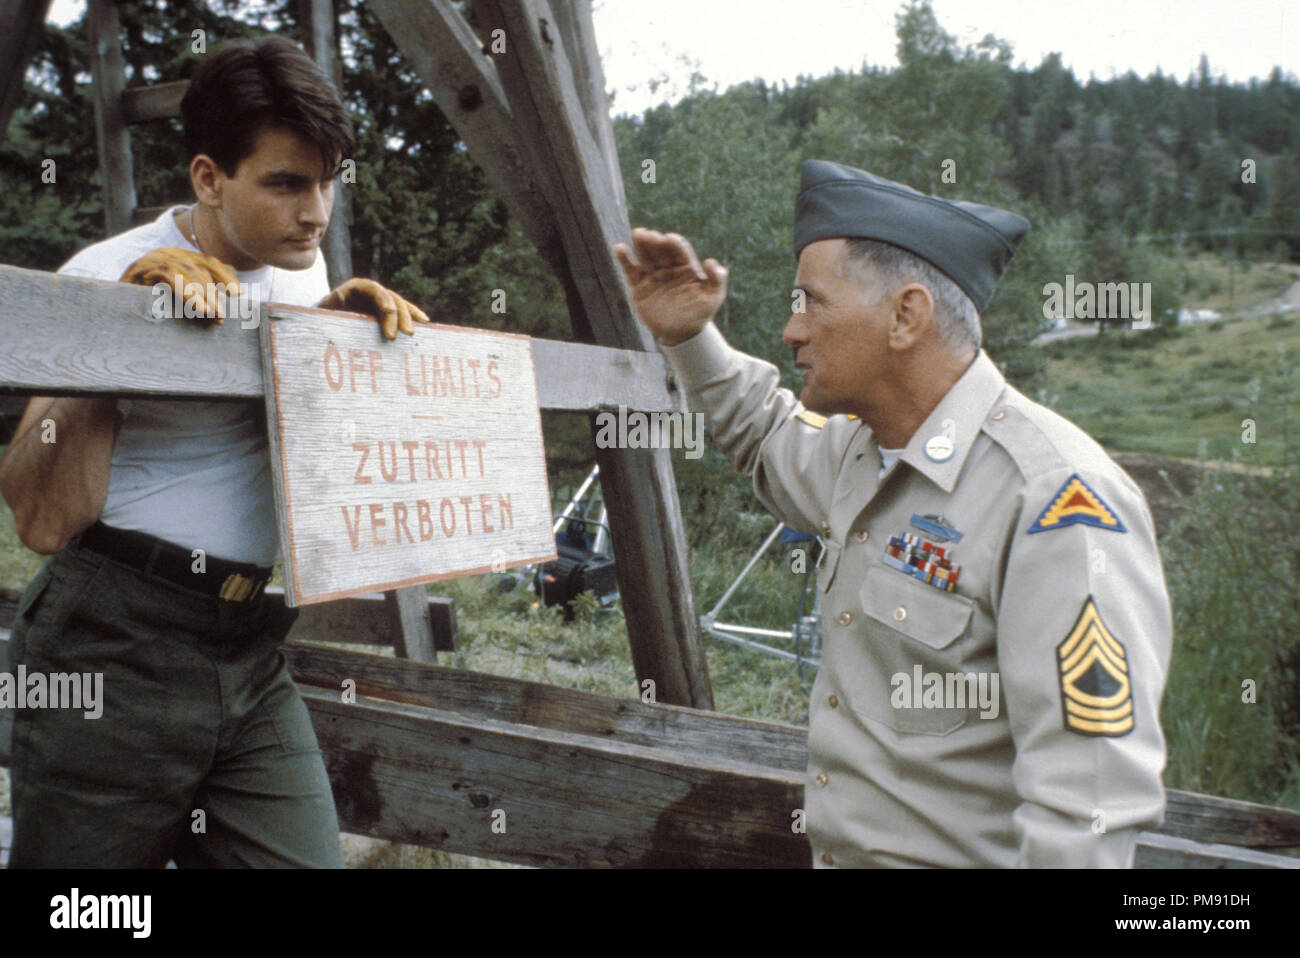 Film still or Publicity still from 'Cadence' Charlie Sheen and Martin Sheen © 1991 Northern Lights Media    All Rights Reserved   File Reference # 31527176THA  For Editorial Use Only Stock Photo